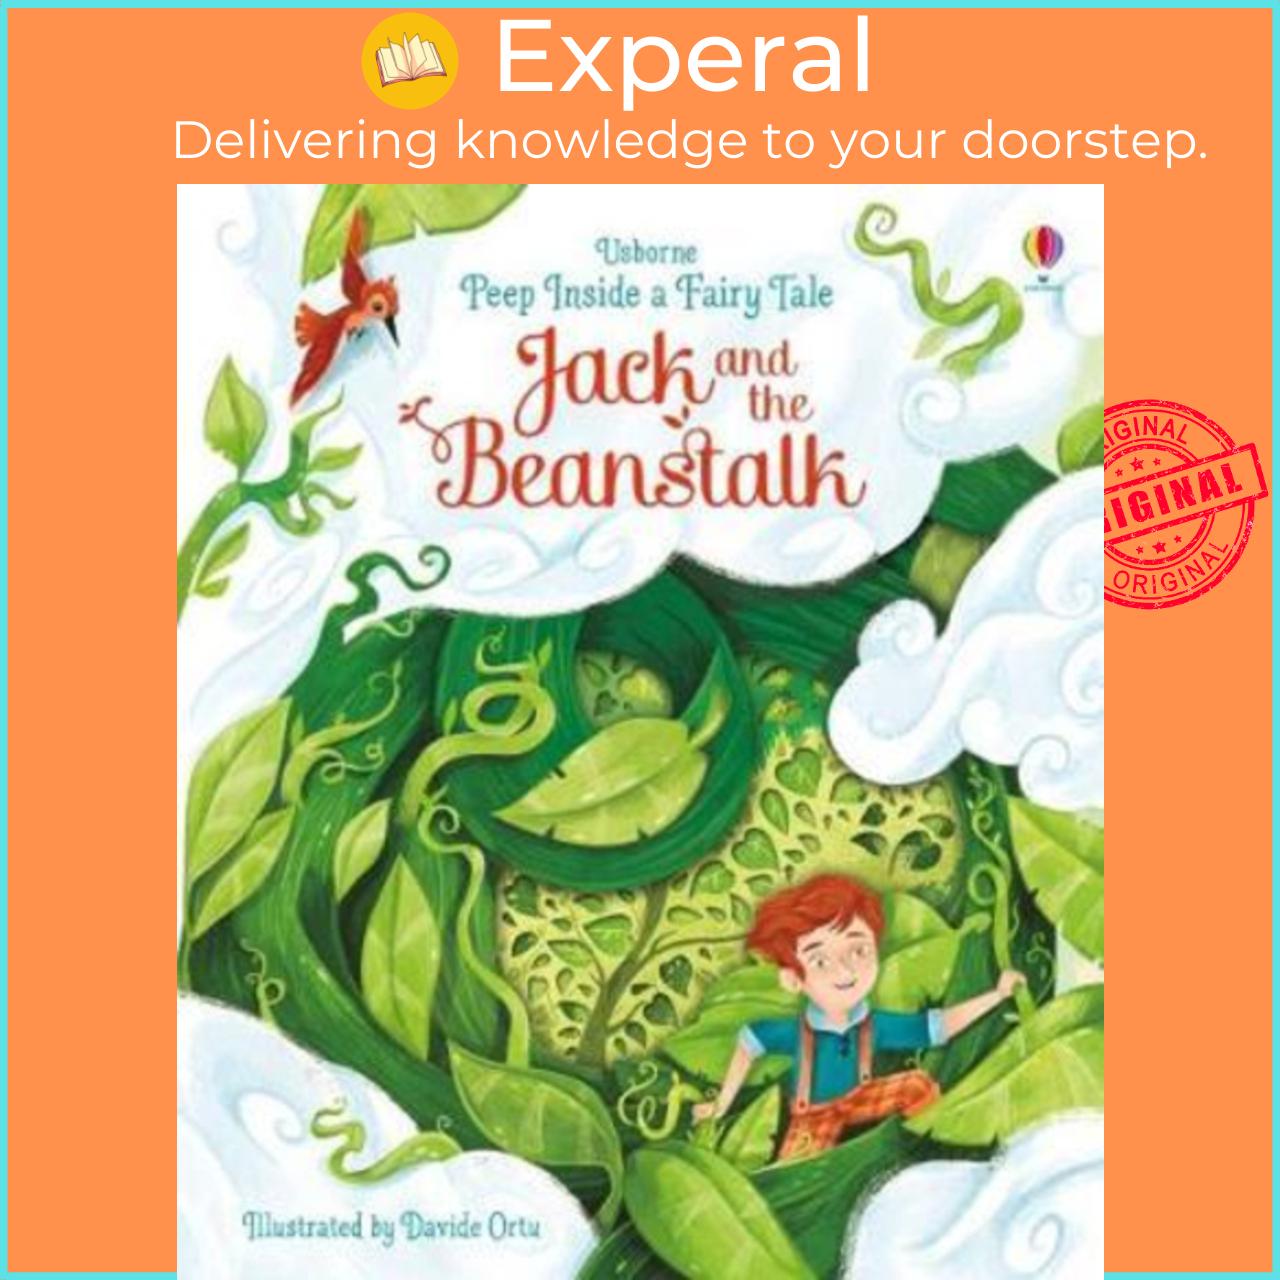 Sách - Peep Inside a Fairy Tale Jack and the Beanstalk by Anna Milbourne (UK edition, paperback)